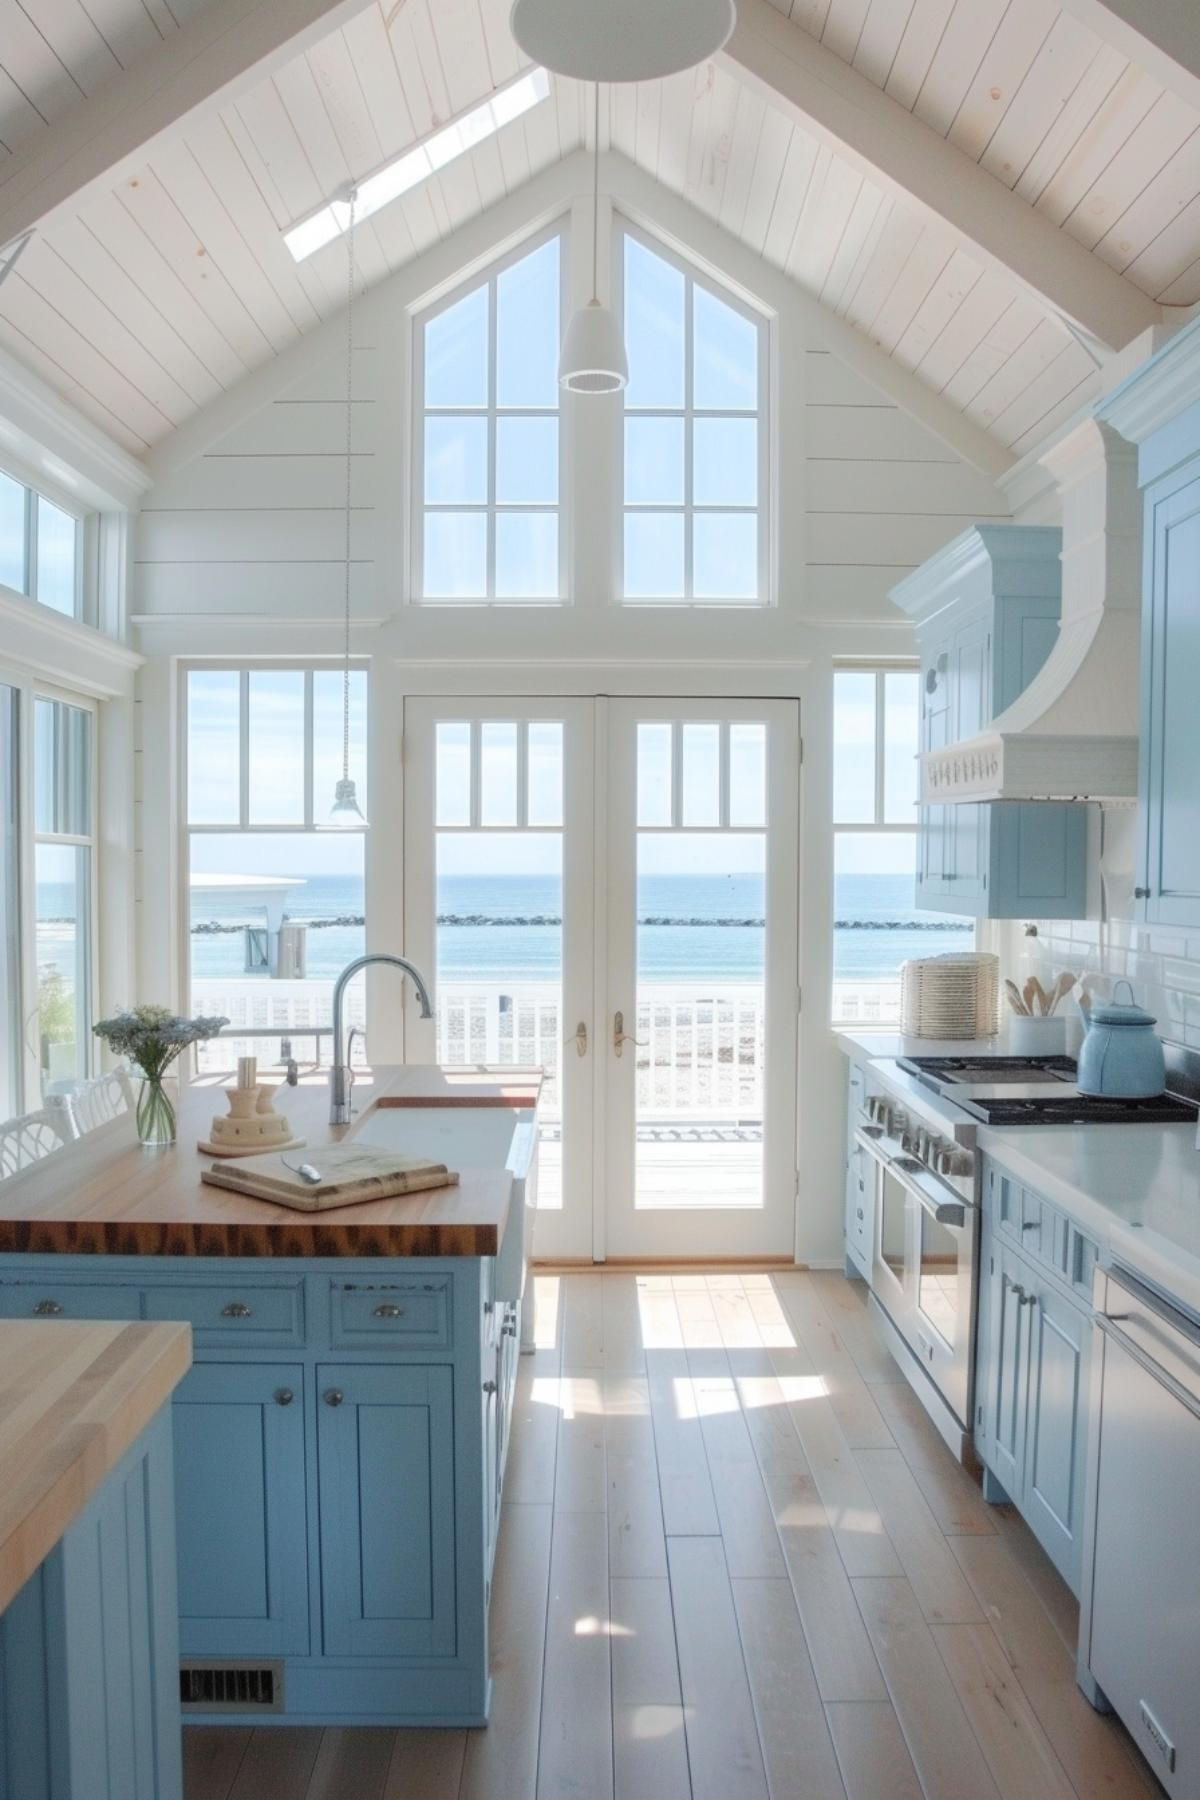 Seaside Sanctuary: Coastal Kitchen Ideas to Bring a Breath of Fresh Air into Your Home